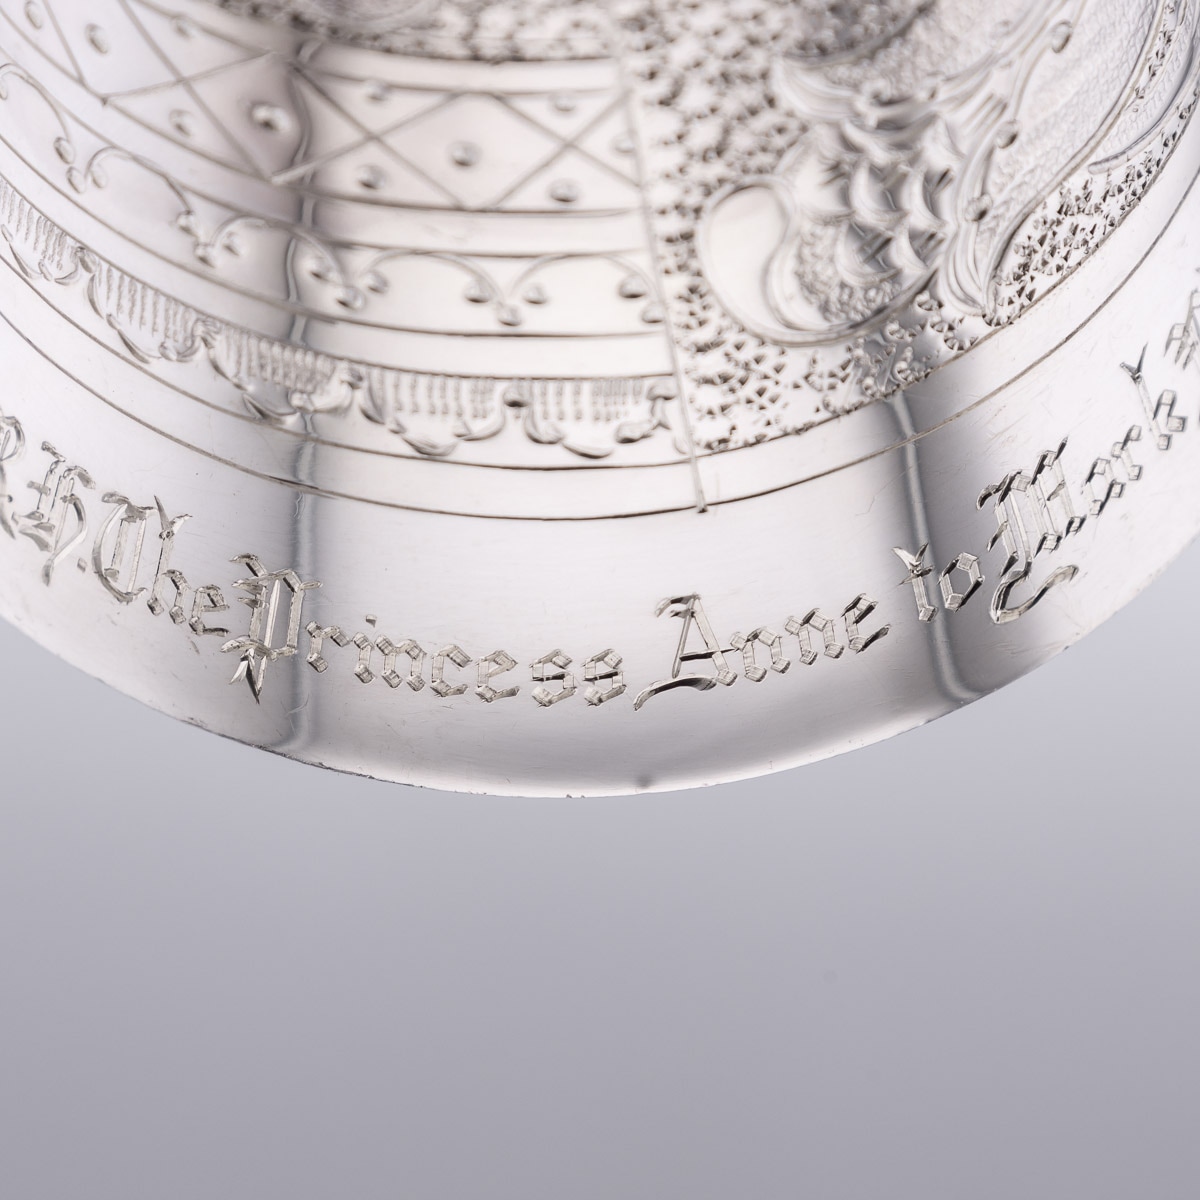 A ROYAL WEDDING SOLID STERLING SILVER NOVELTY WAGER CUP, LONDON, C. 1973 - Image 15 of 23